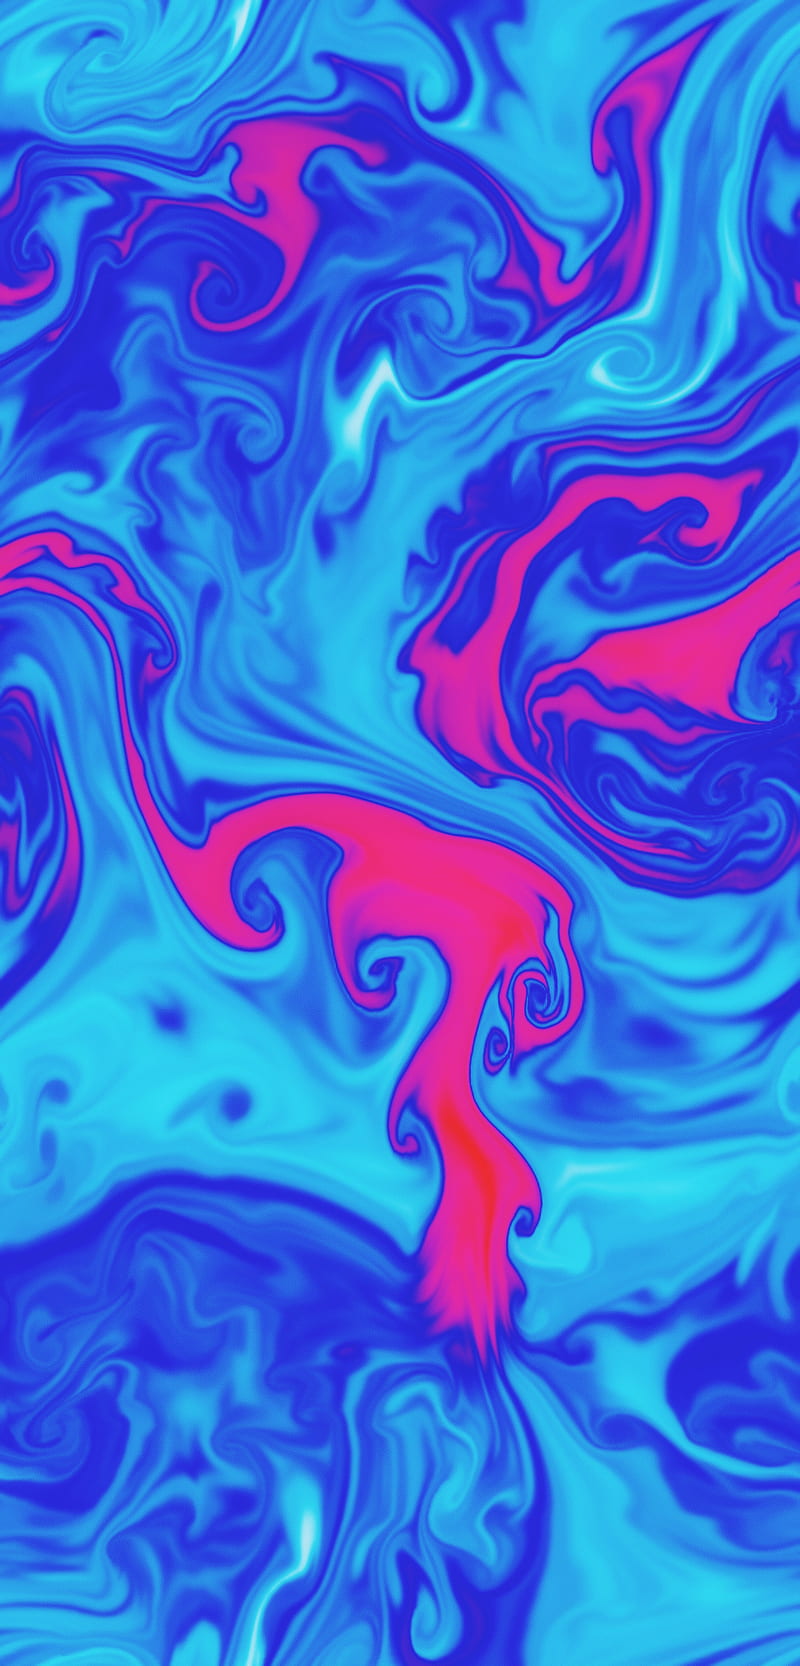 1366x768px, 720P free download | Blue Red water color, abstract, mix ...